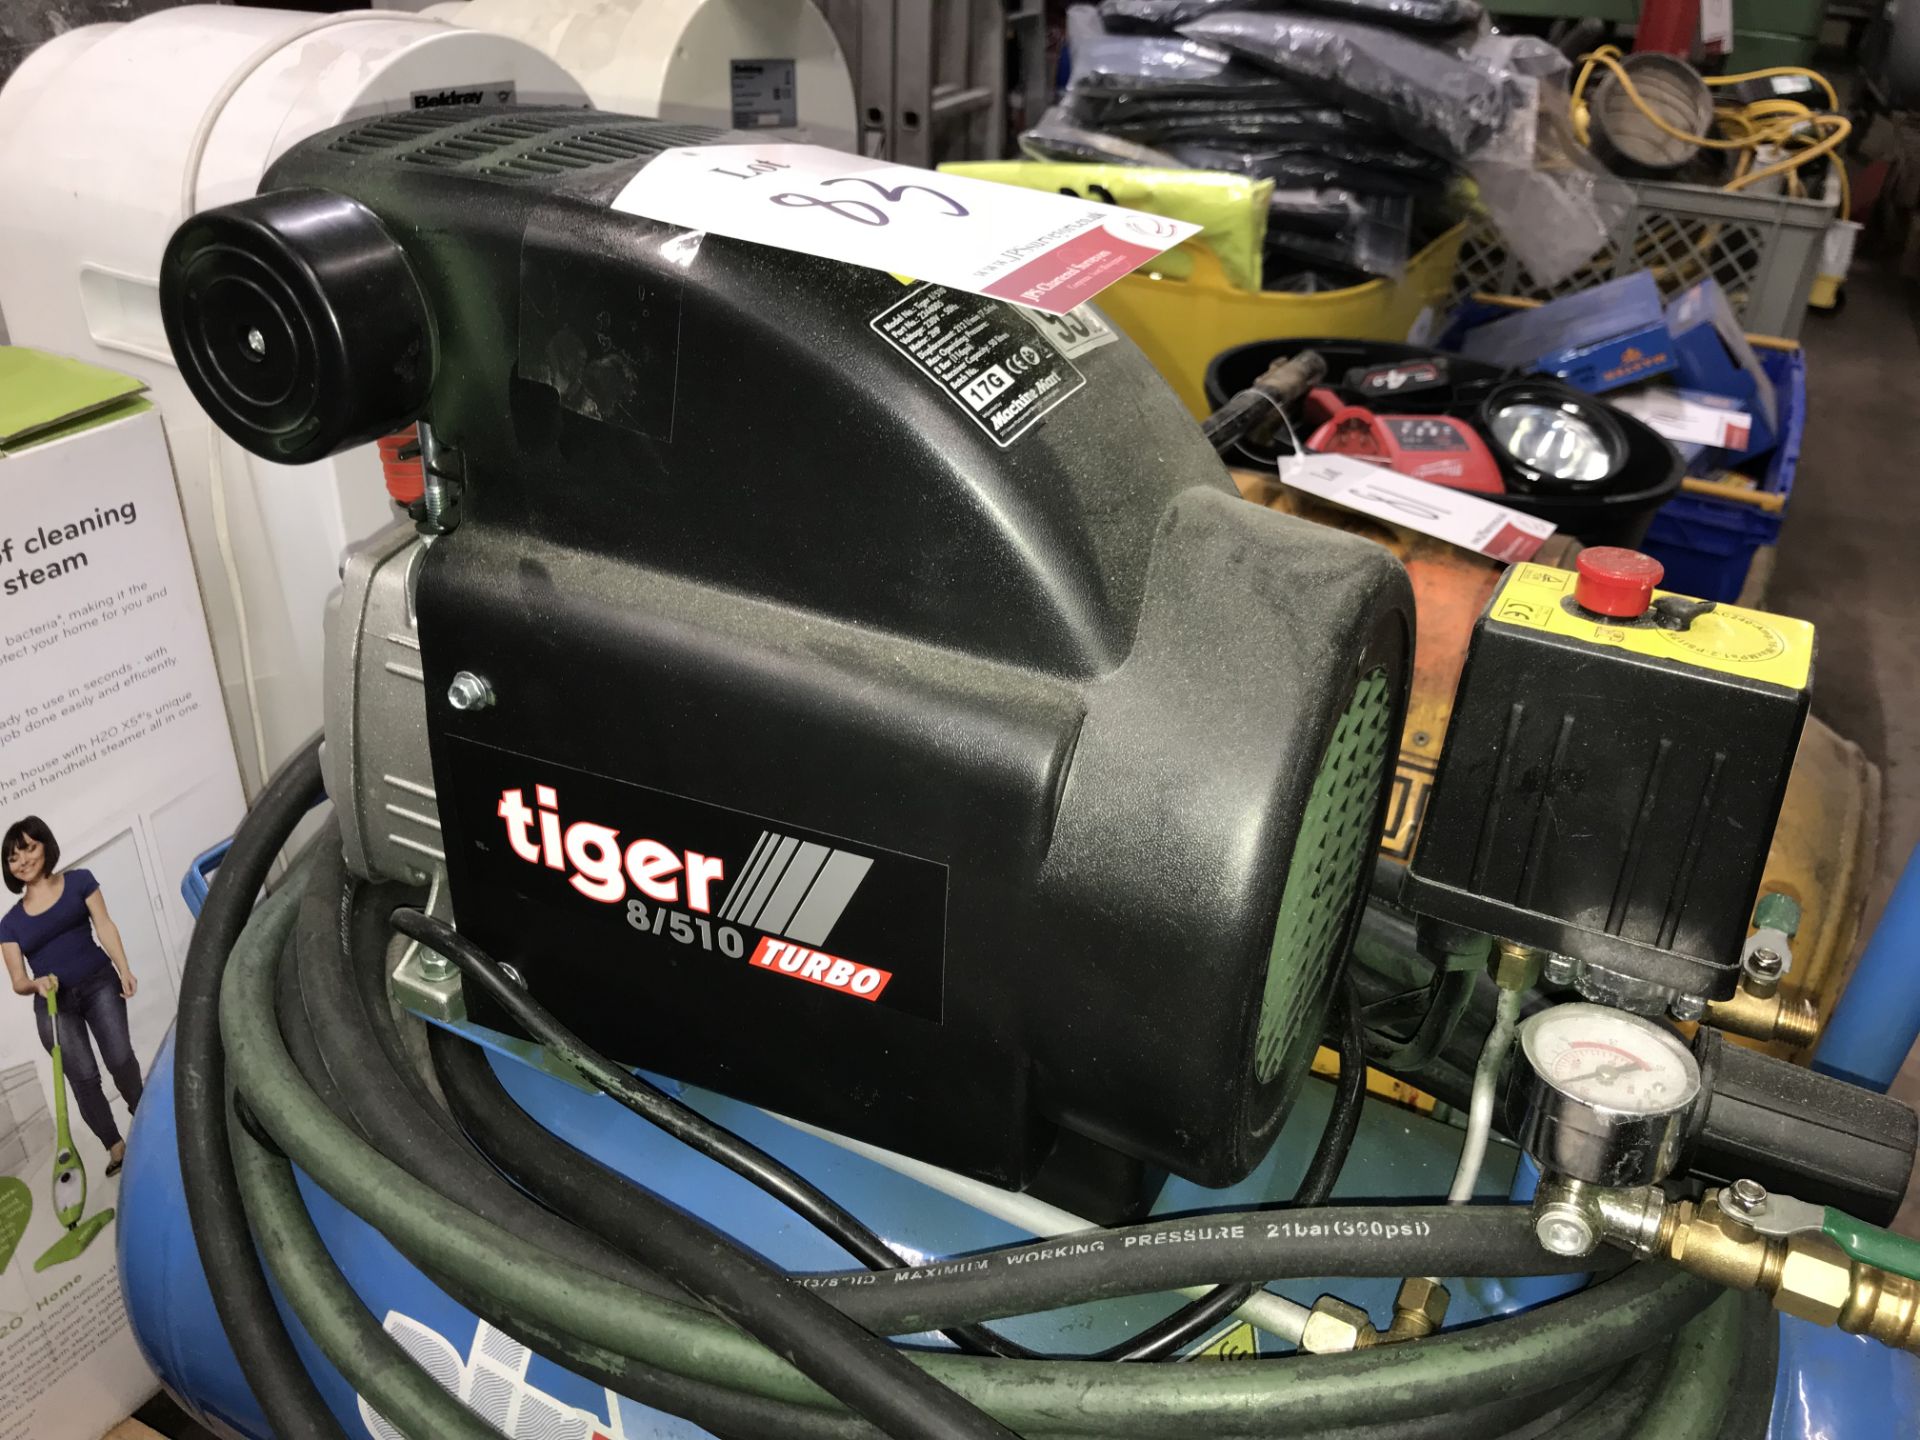 Airmaster Mobile Air Compressor w/ Tiger 8/510 Turbo Motor - Image 2 of 3